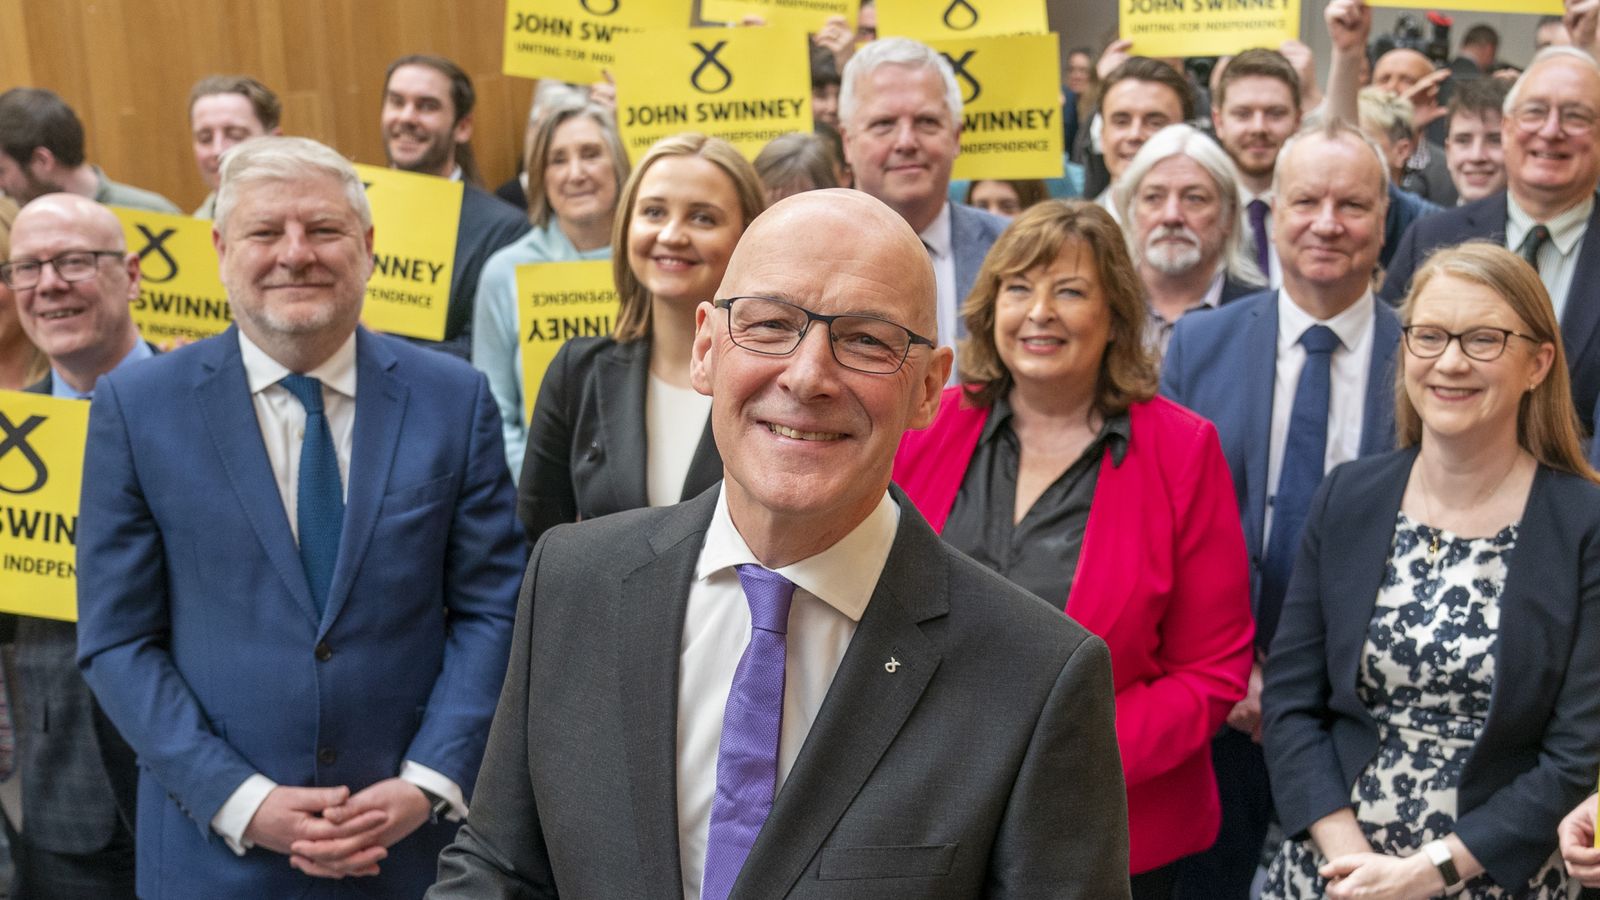 SNP leadership race: John Swinney new party leader and is now set to become Scottish first minister